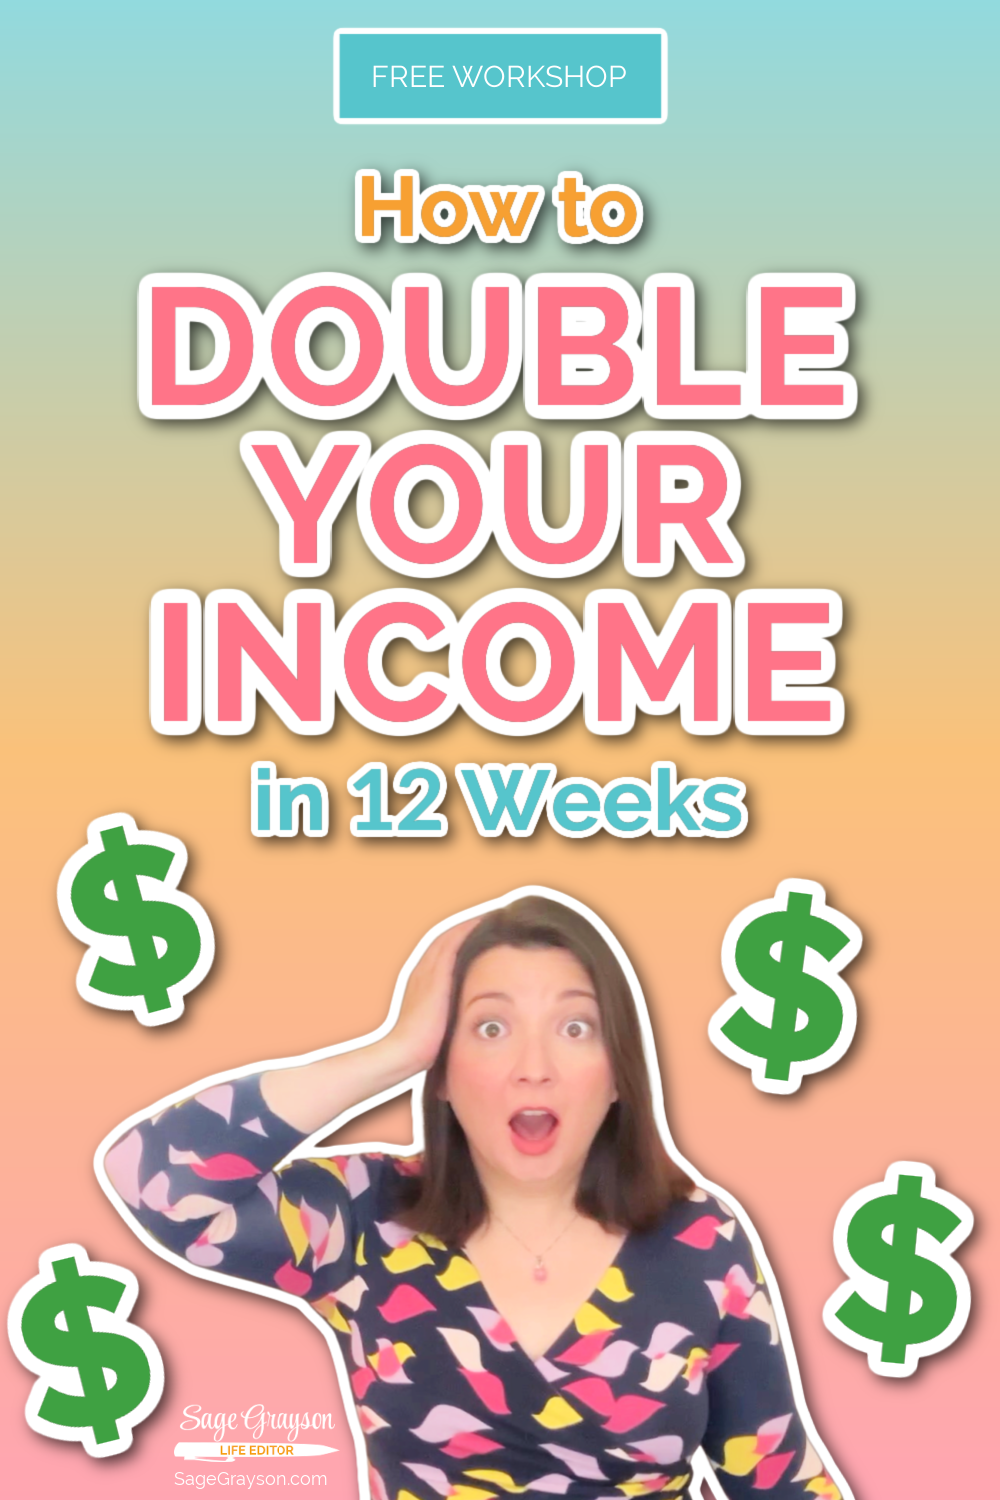 Double-Your-Income-Workshop-pin-thumbnail